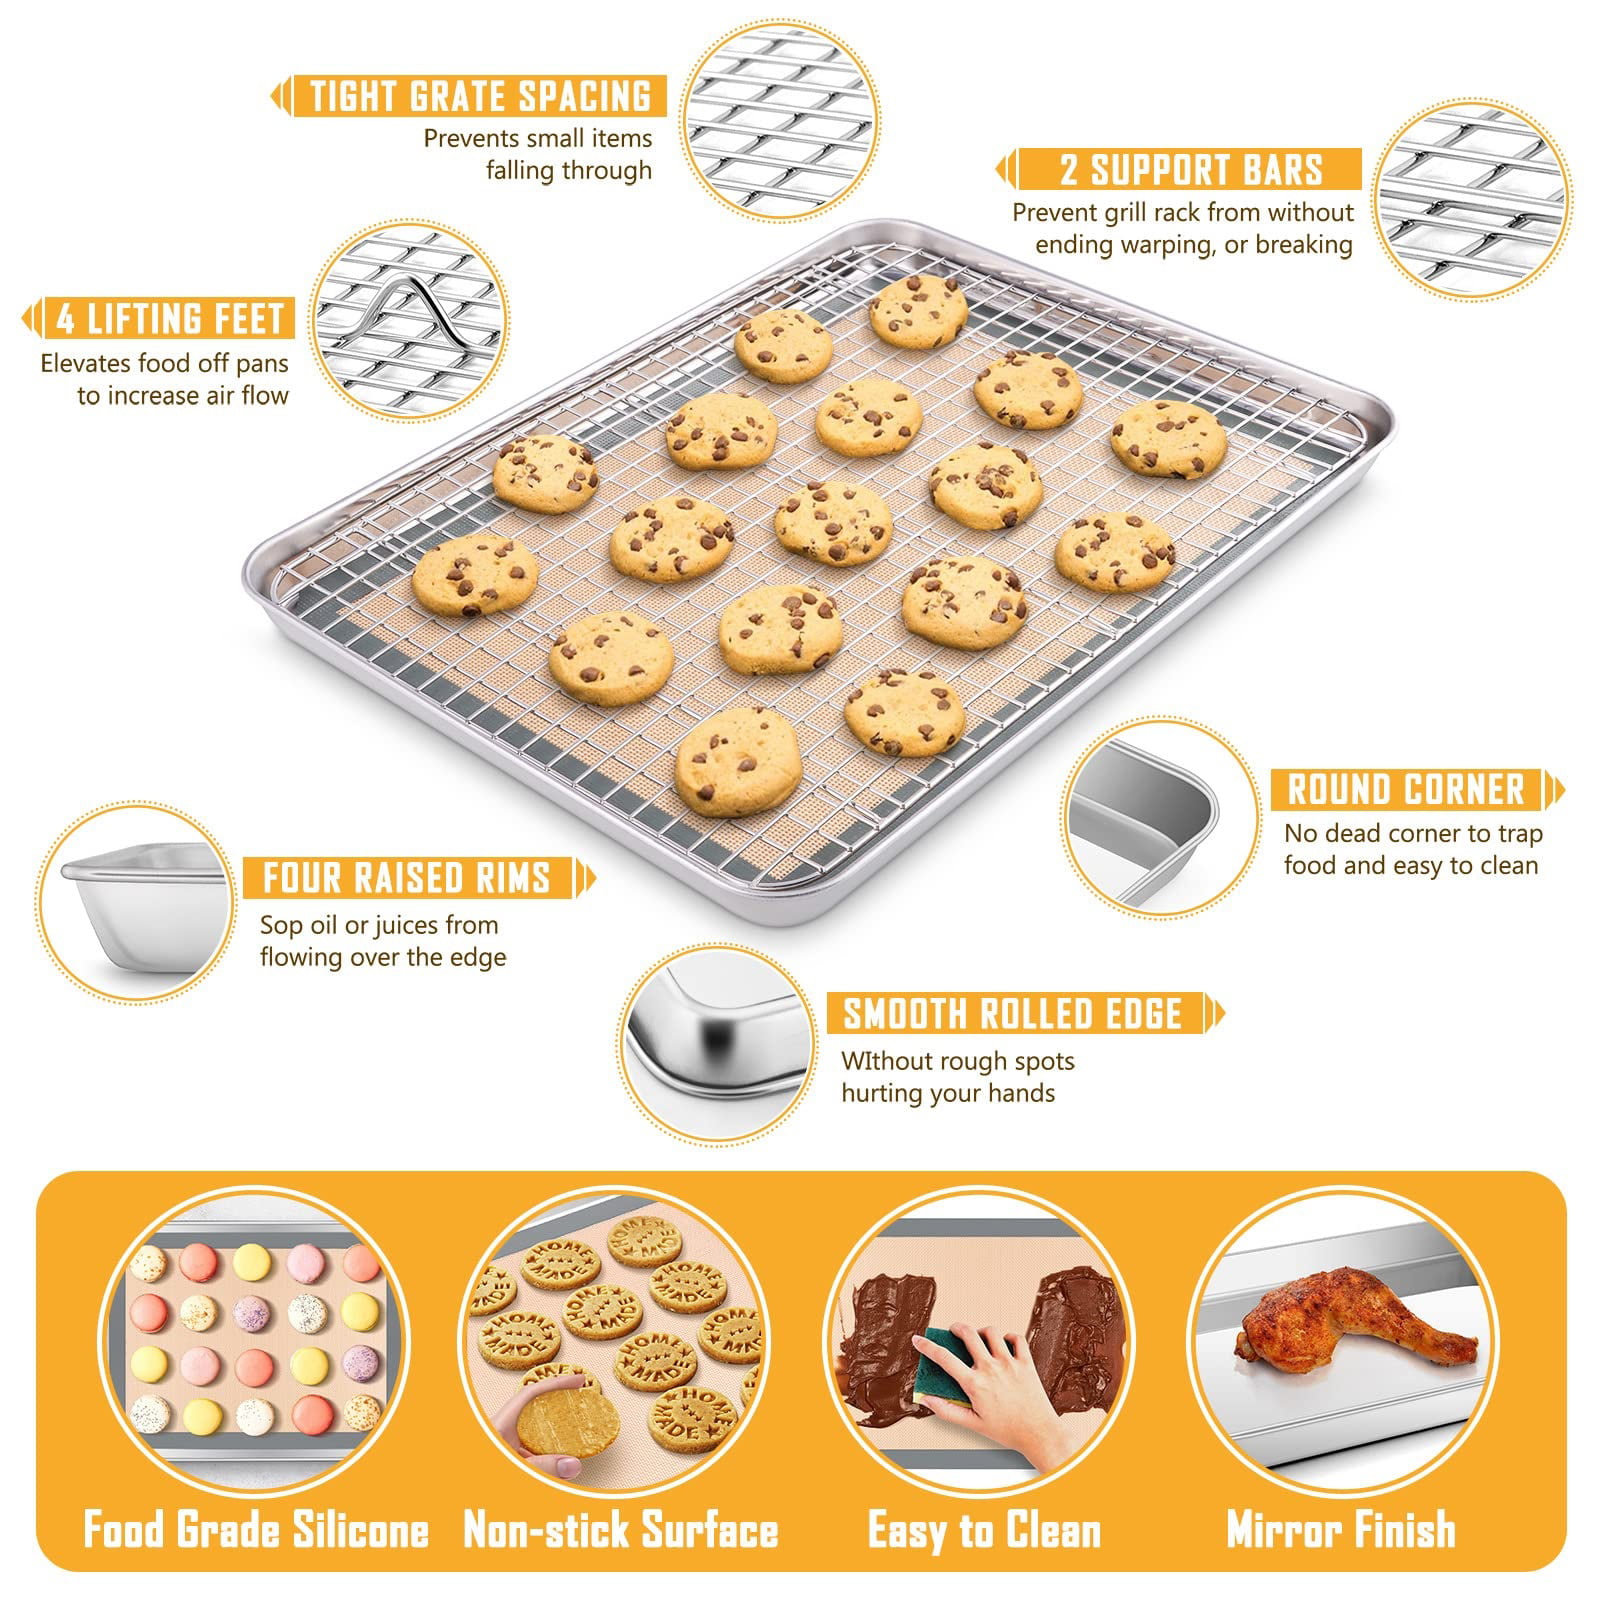 Fridja Bake Set, Cookie Pan with Metal Cooling Grid Set, Stainless Steel Baking Sheet with Cooling Grid, 9 inch x 12 inch, Size: 9 x 12